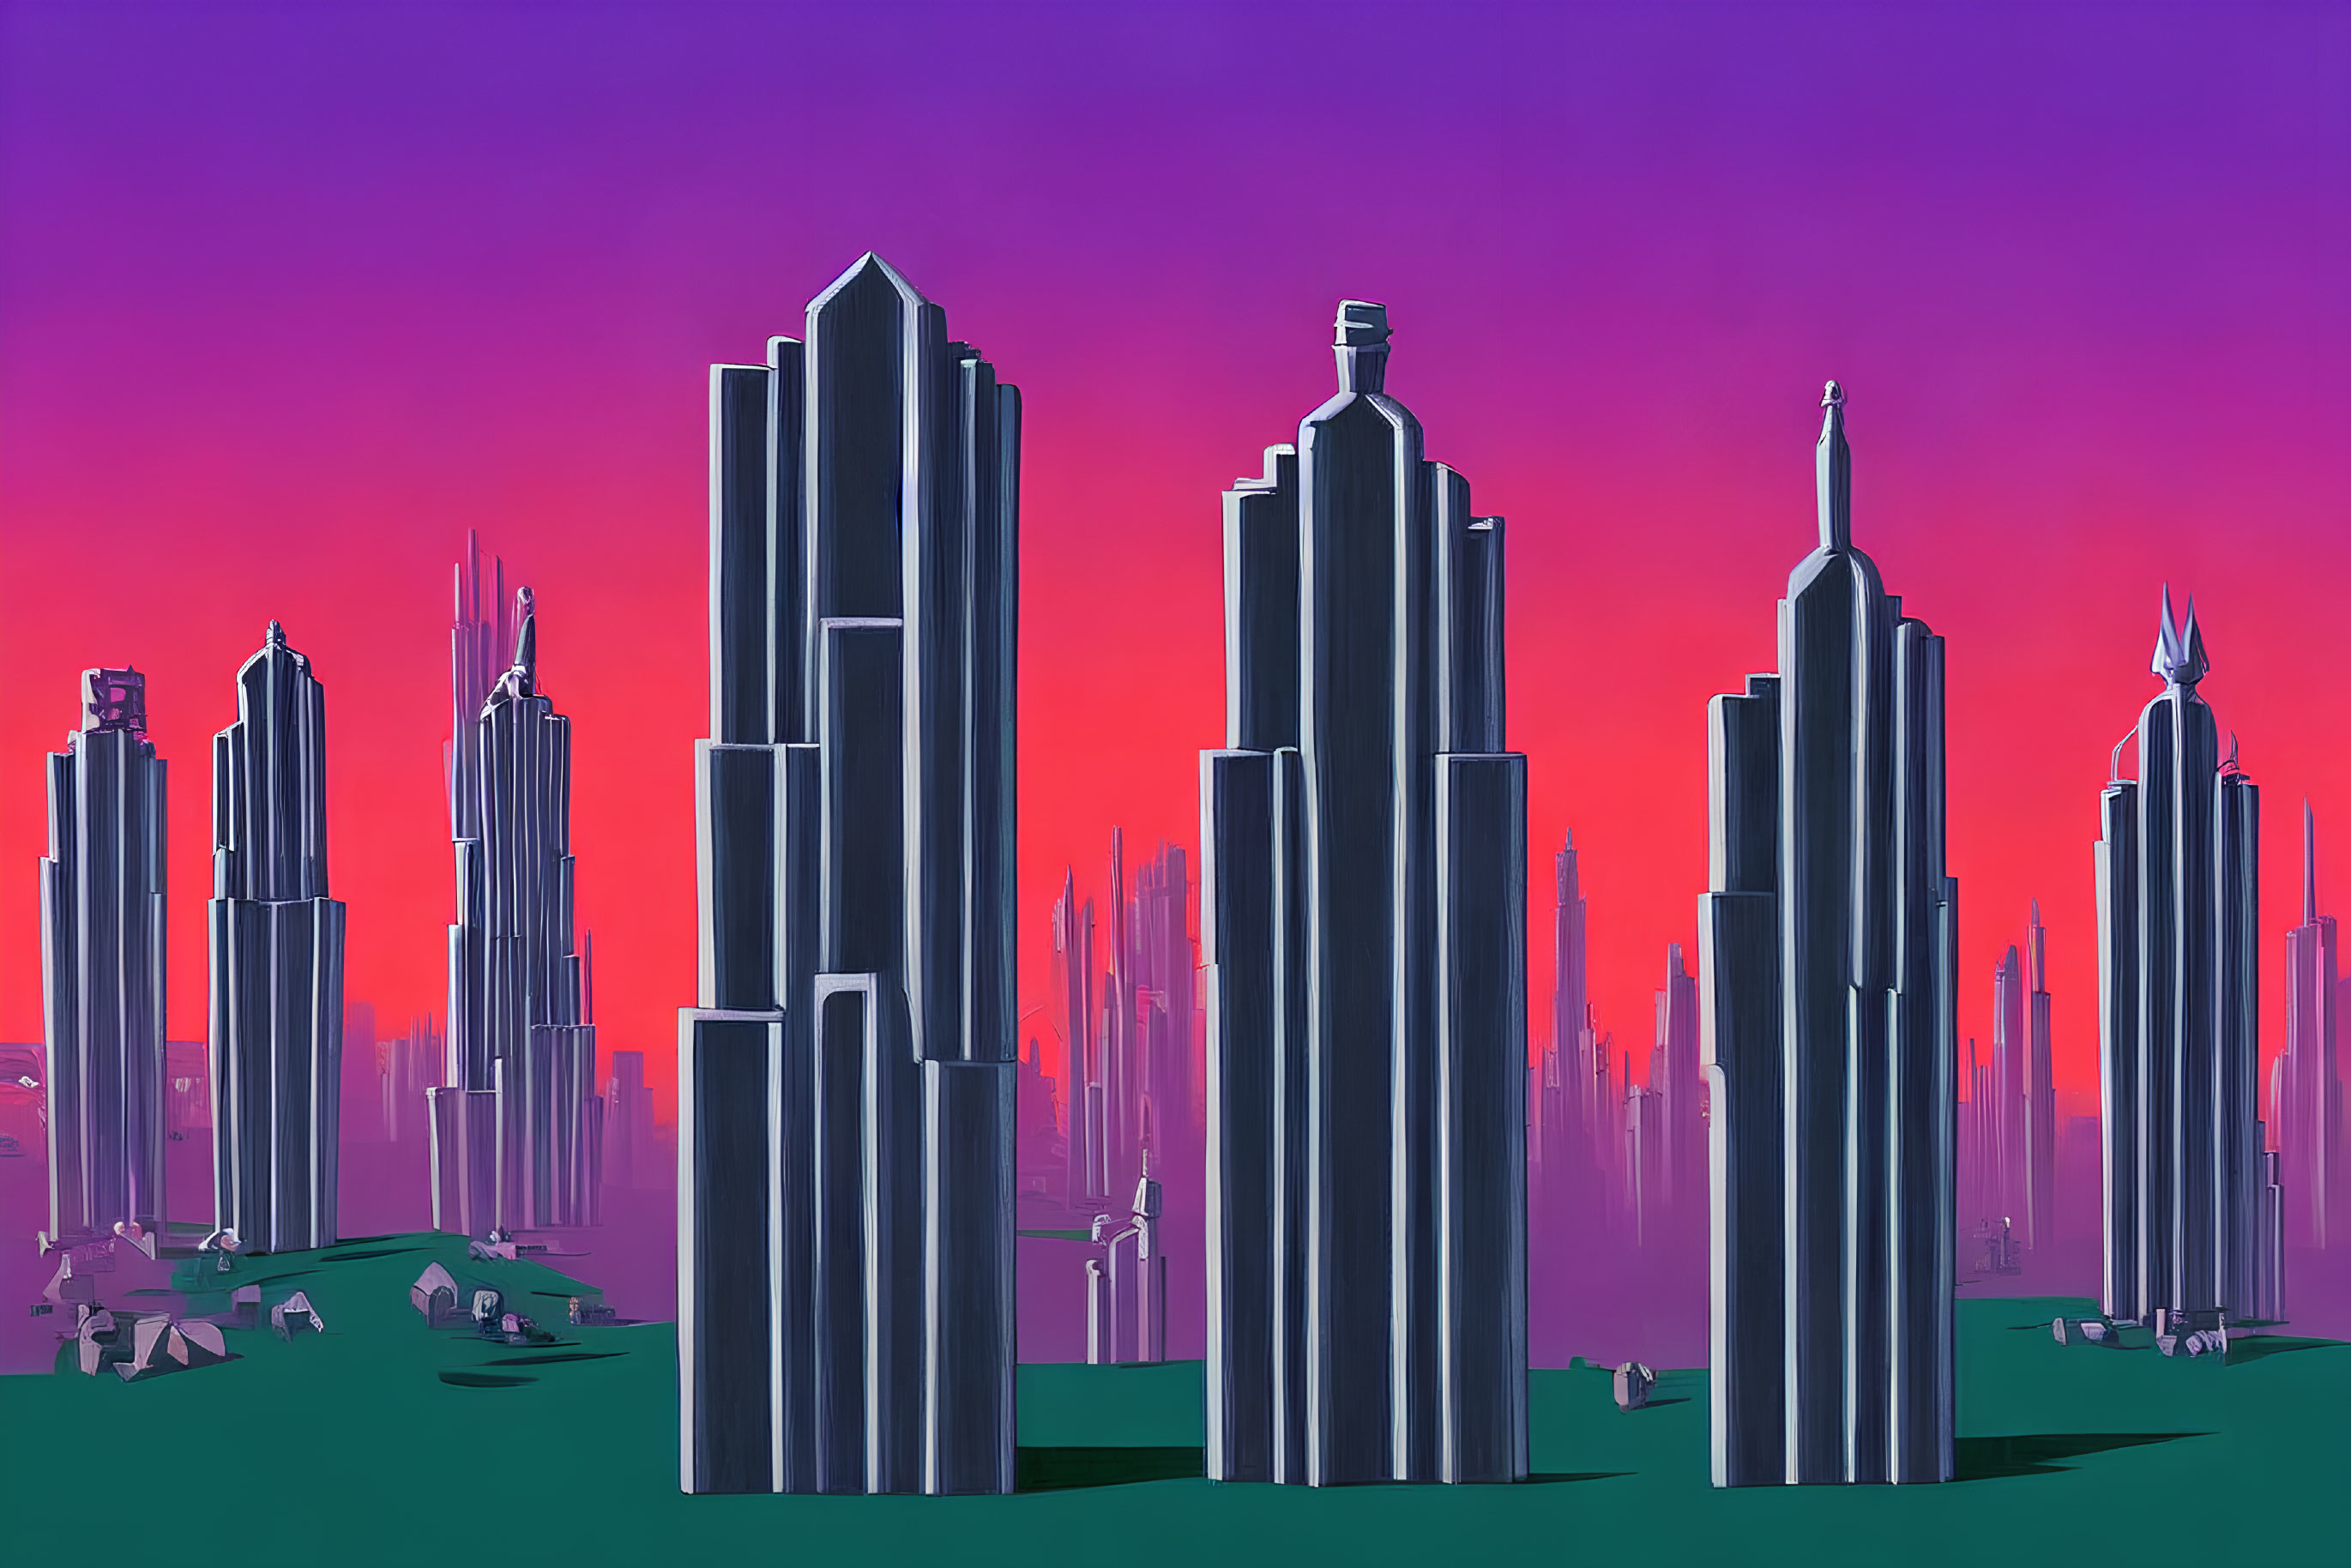 Futuristic city skyline illustration with tall skyscrapers against purple and pink sky